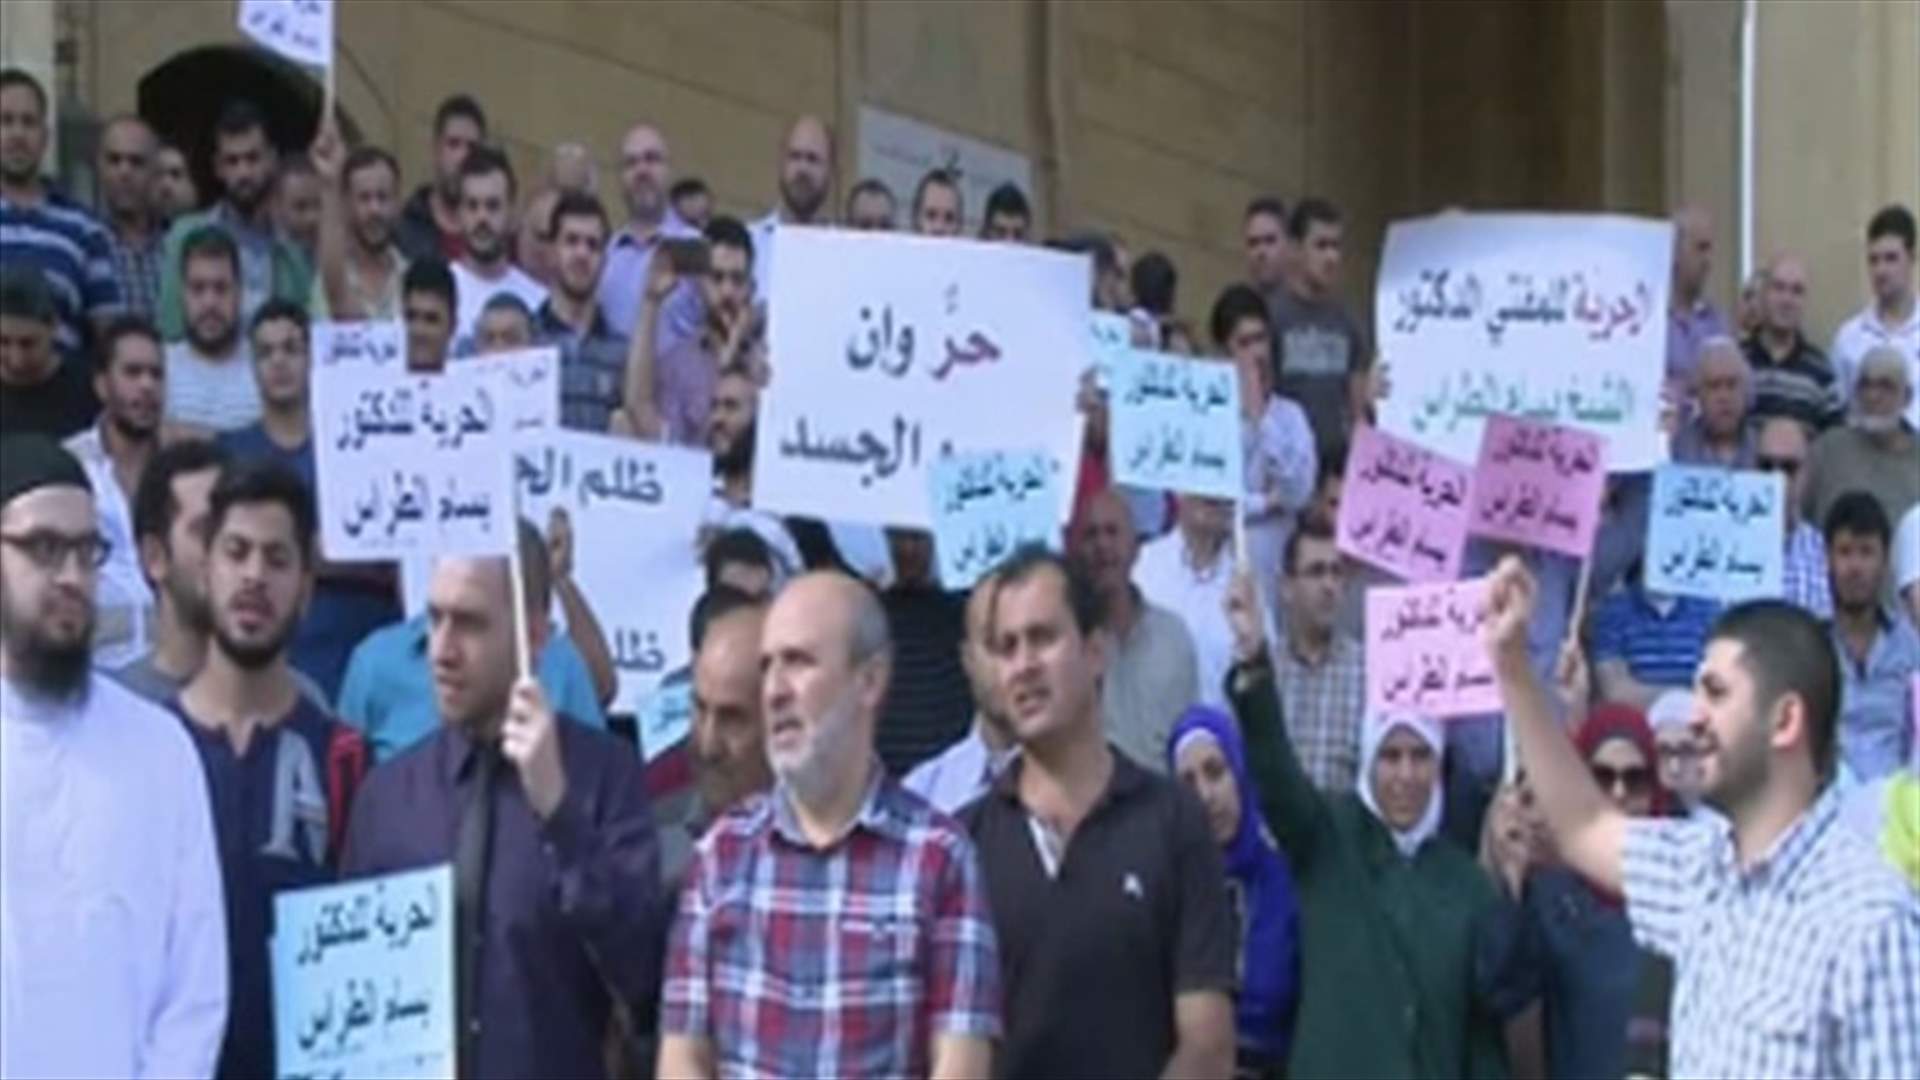 Supporters of Sheikh al-Tarras rally in Beirut 